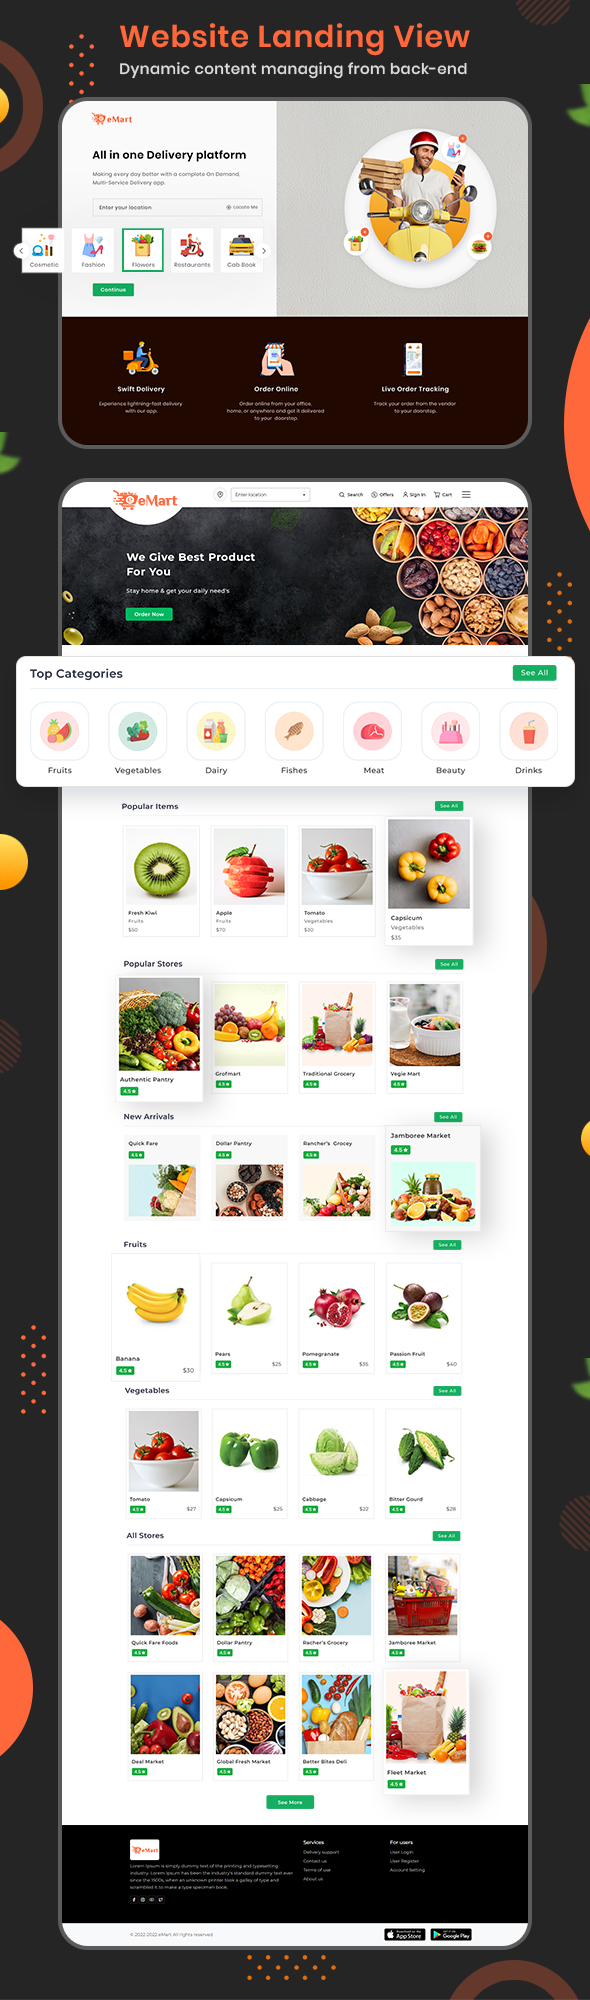 eMart | Multivendor Food, eCommerce, Parcel, Taxi booking, Car Rental App with Admin and Website - 34